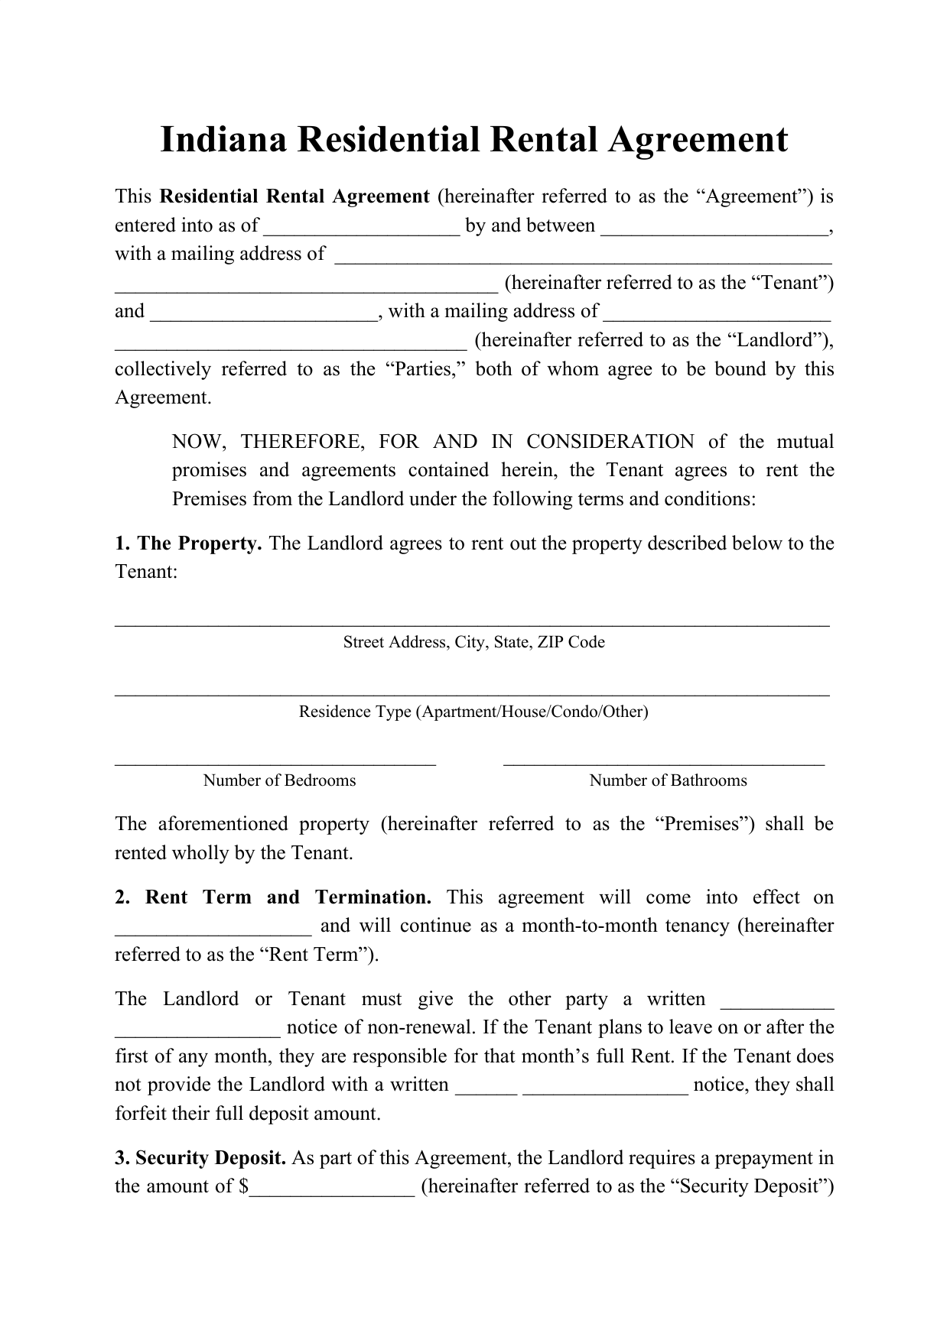 Residential Rental Agreement Template - Indiana, Page 1